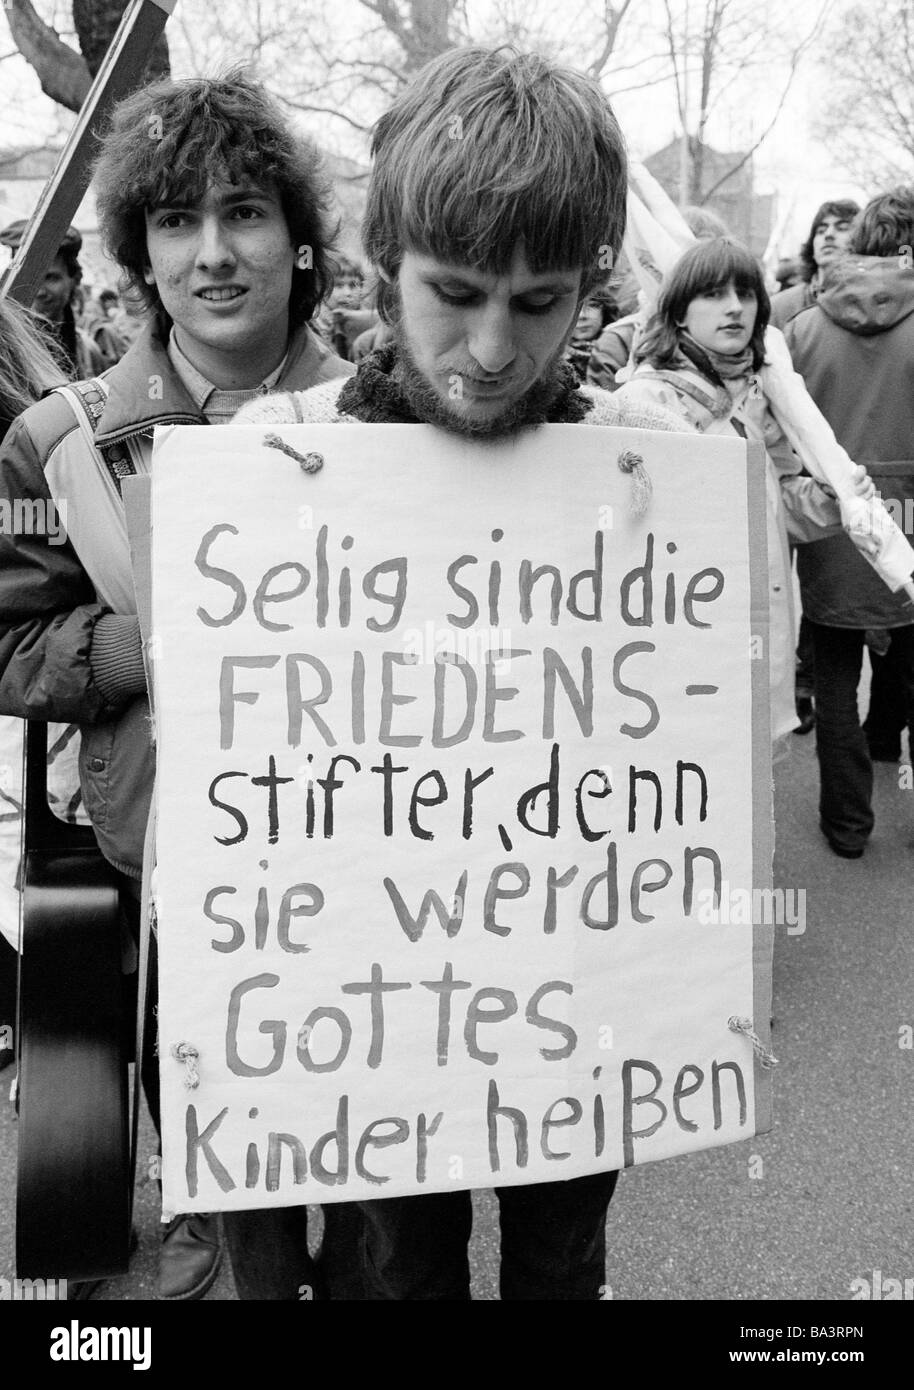 Eighties, black and white photo, people, peace demonstration, Easter marches 1983 in Germany against nuclear armament, young man presents a protest sign, aged 20 to 25 years, D-Oberhausen, Ruhr area, North Rhine-Westphalia Stock Photo